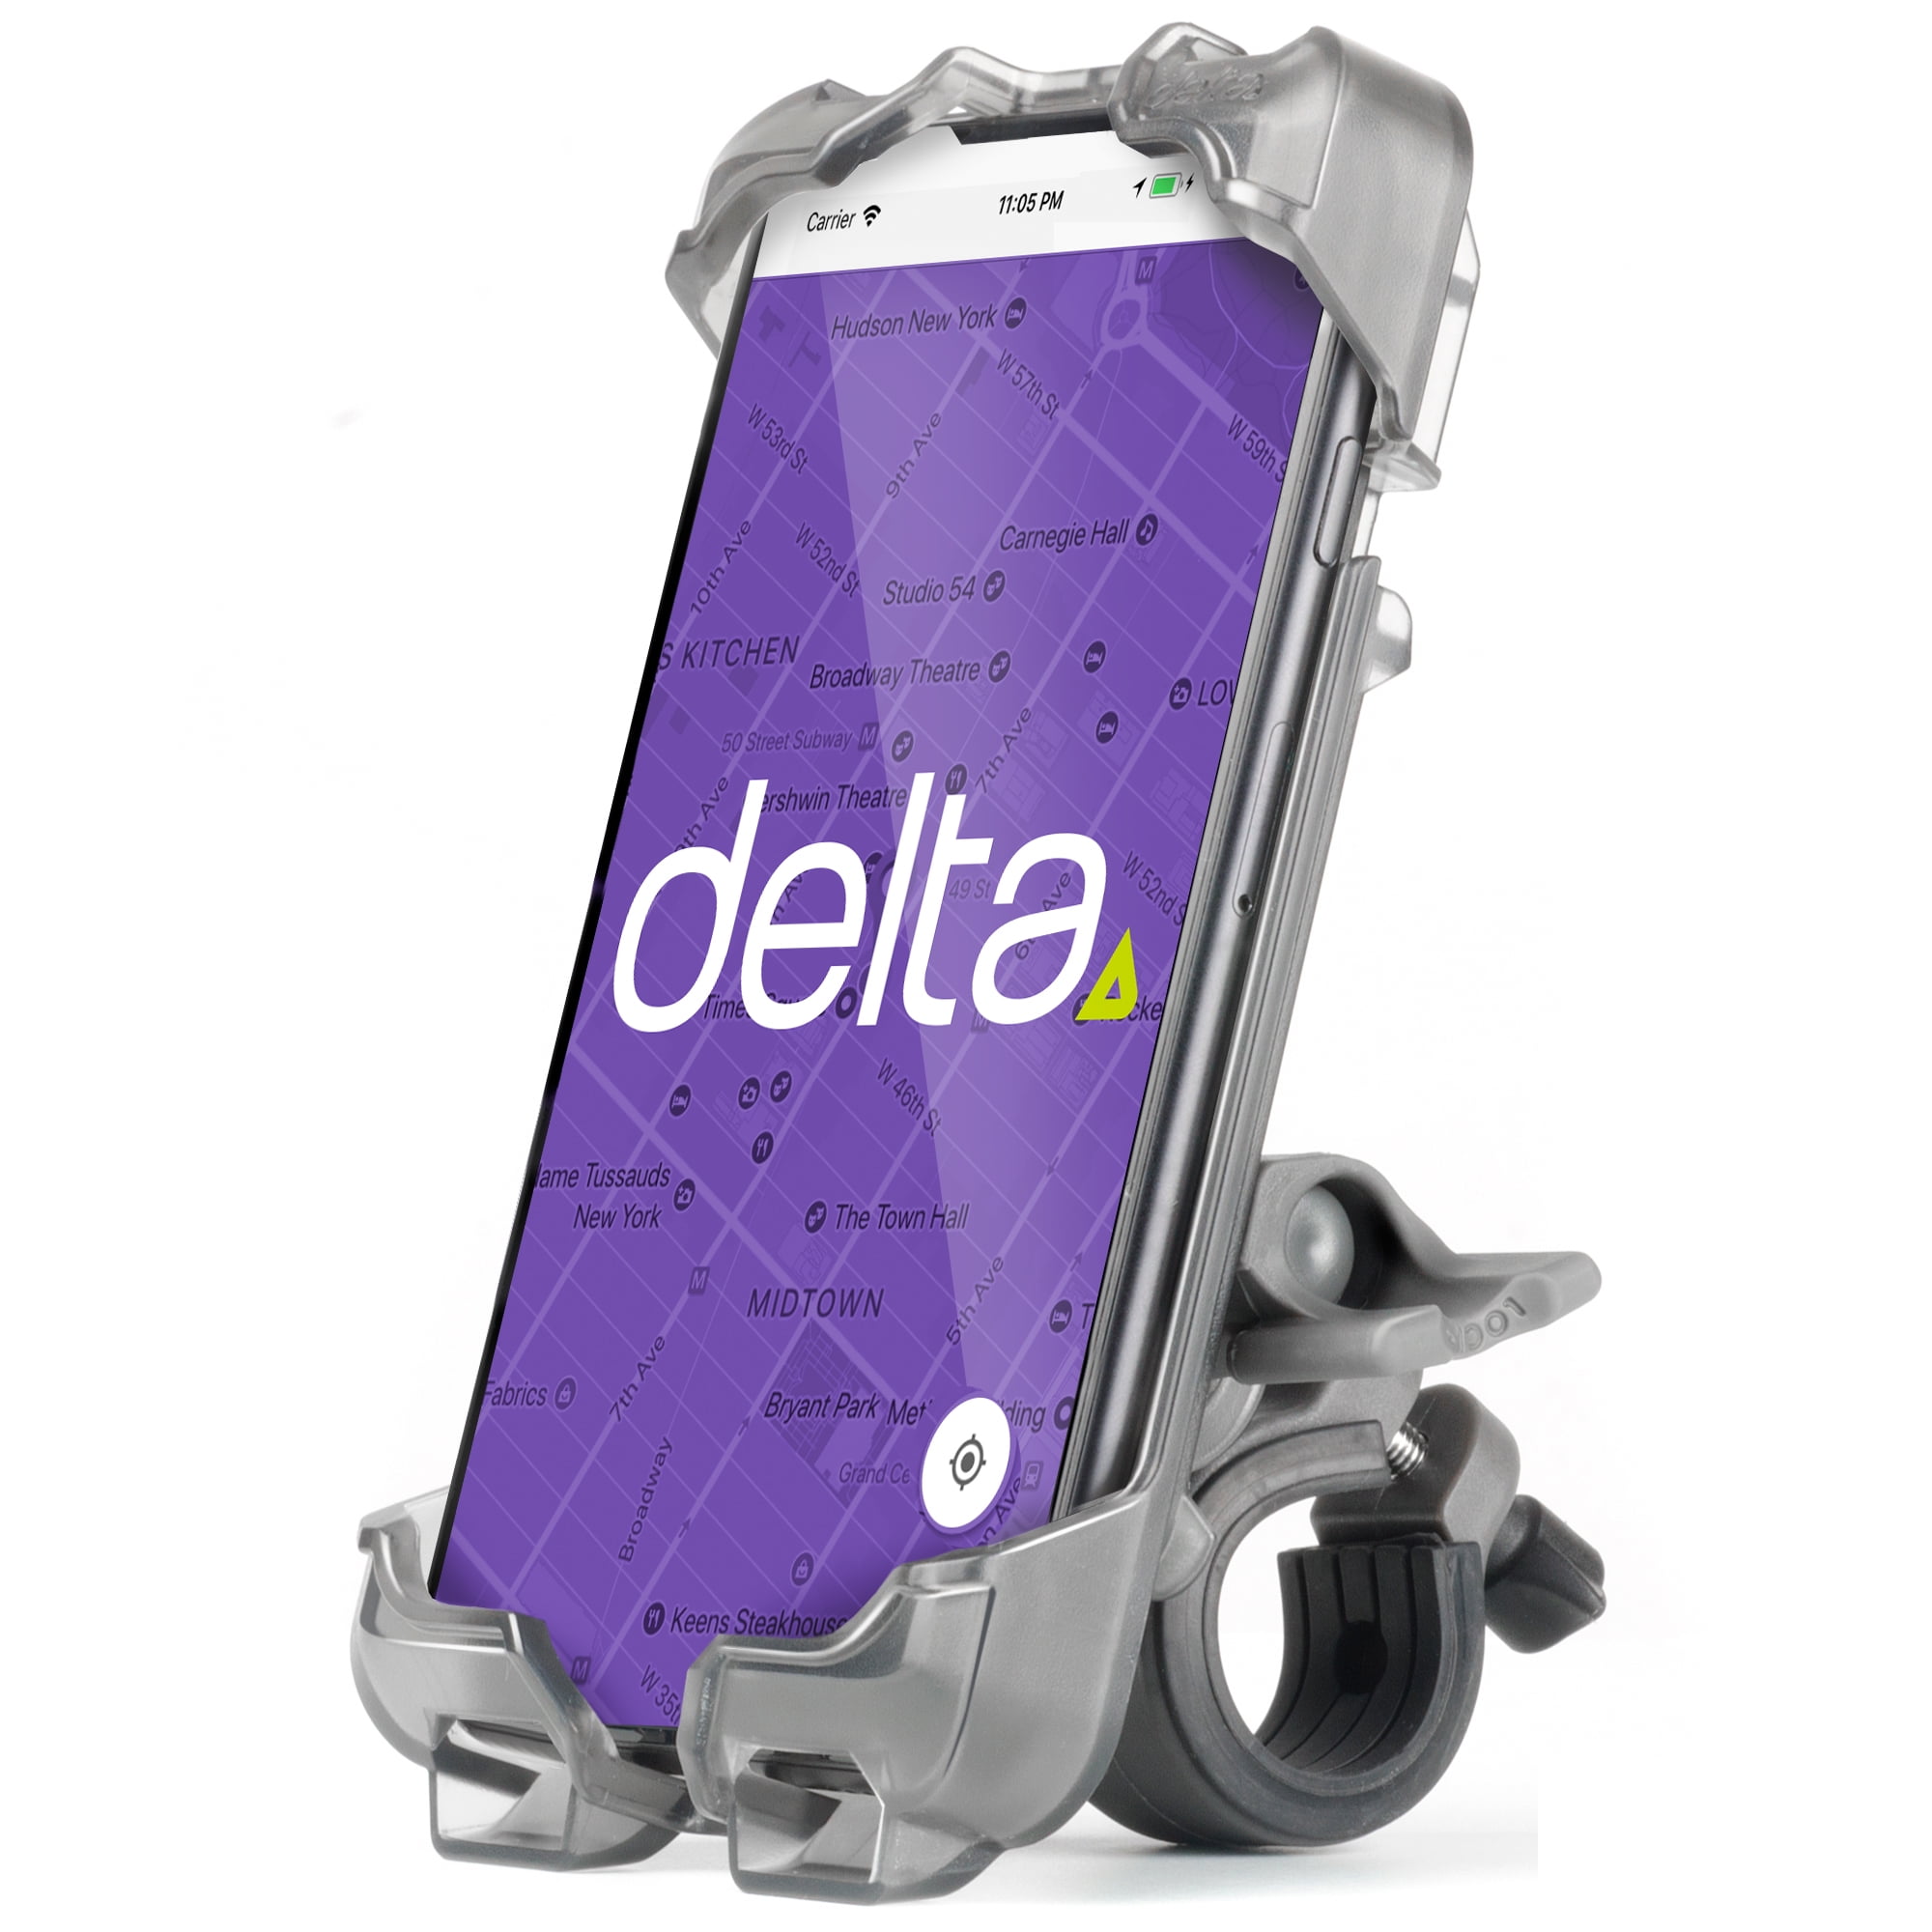 Details about   Delta Cycle X Mount Bike Phone Holder Caddy Case iPhone Samsung Android 